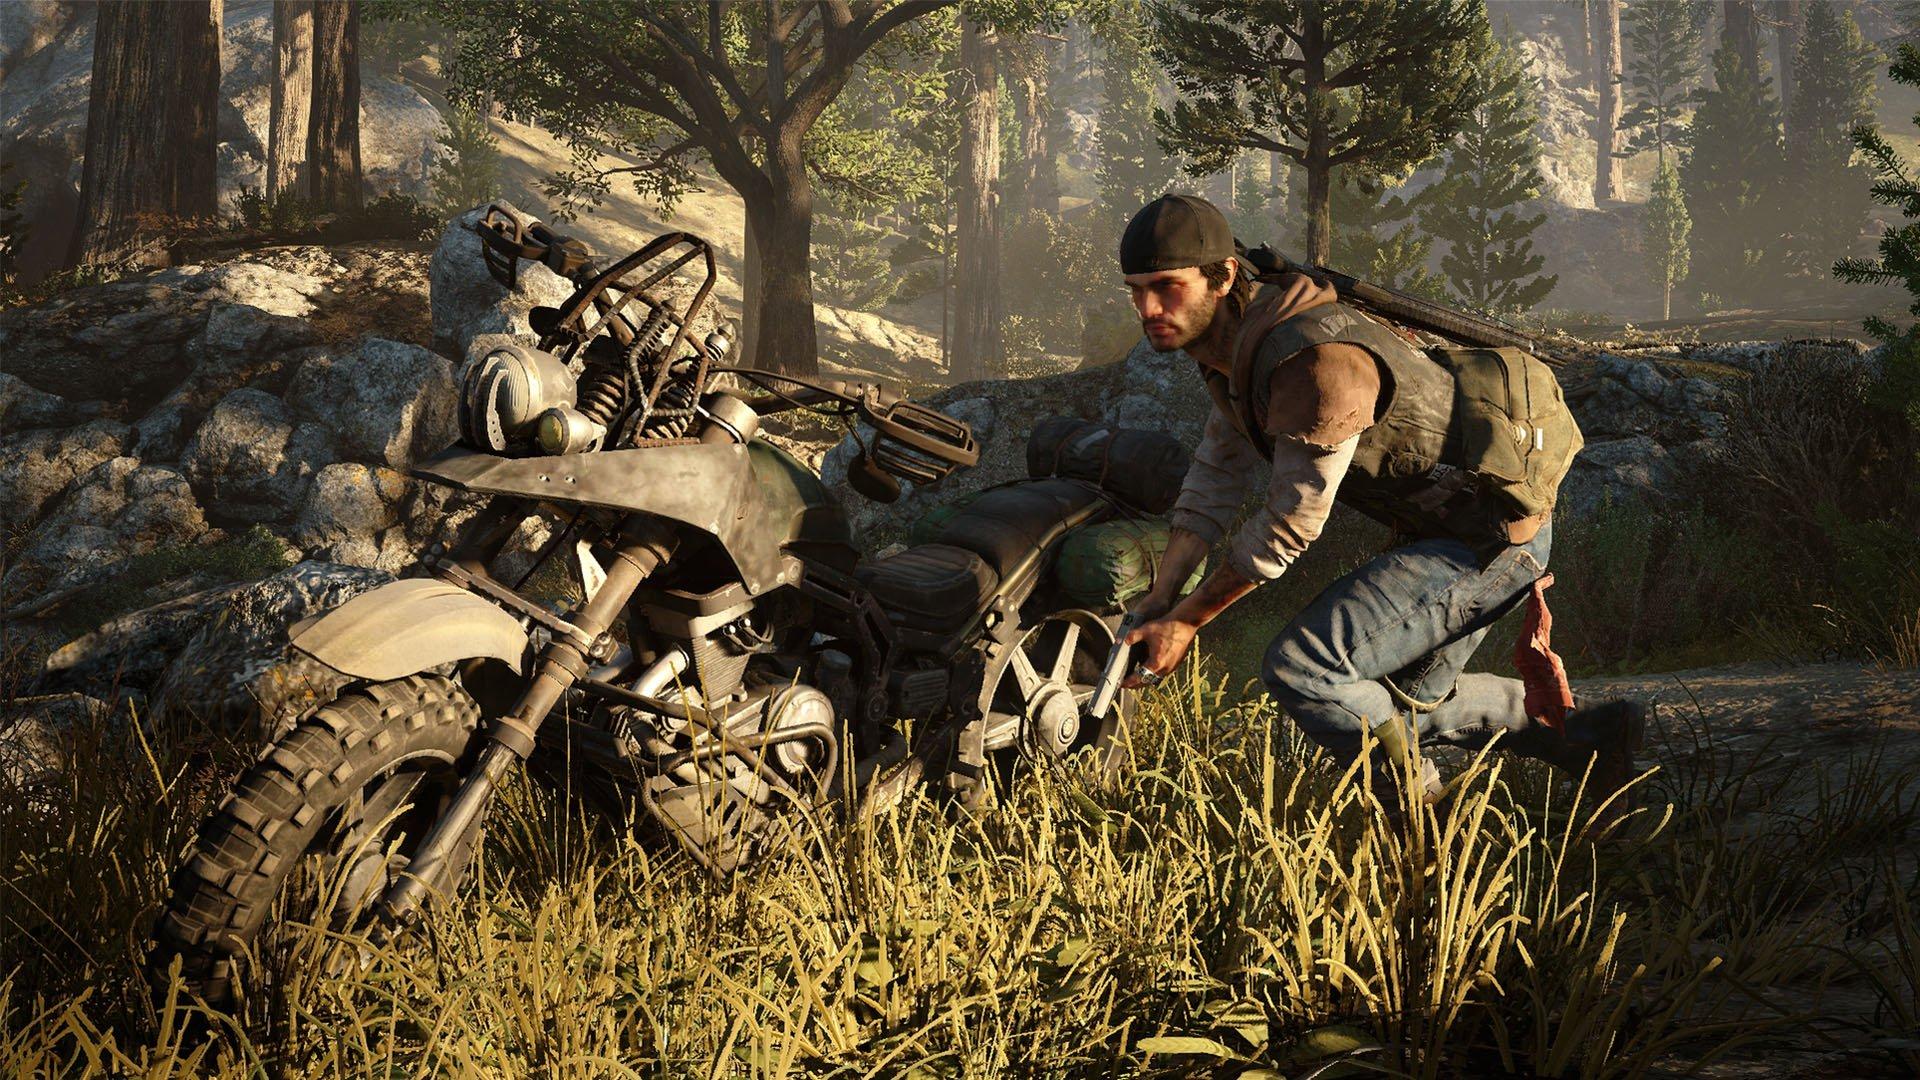 Image for Sony is reportedly developing a Days Gone live-action adaptation